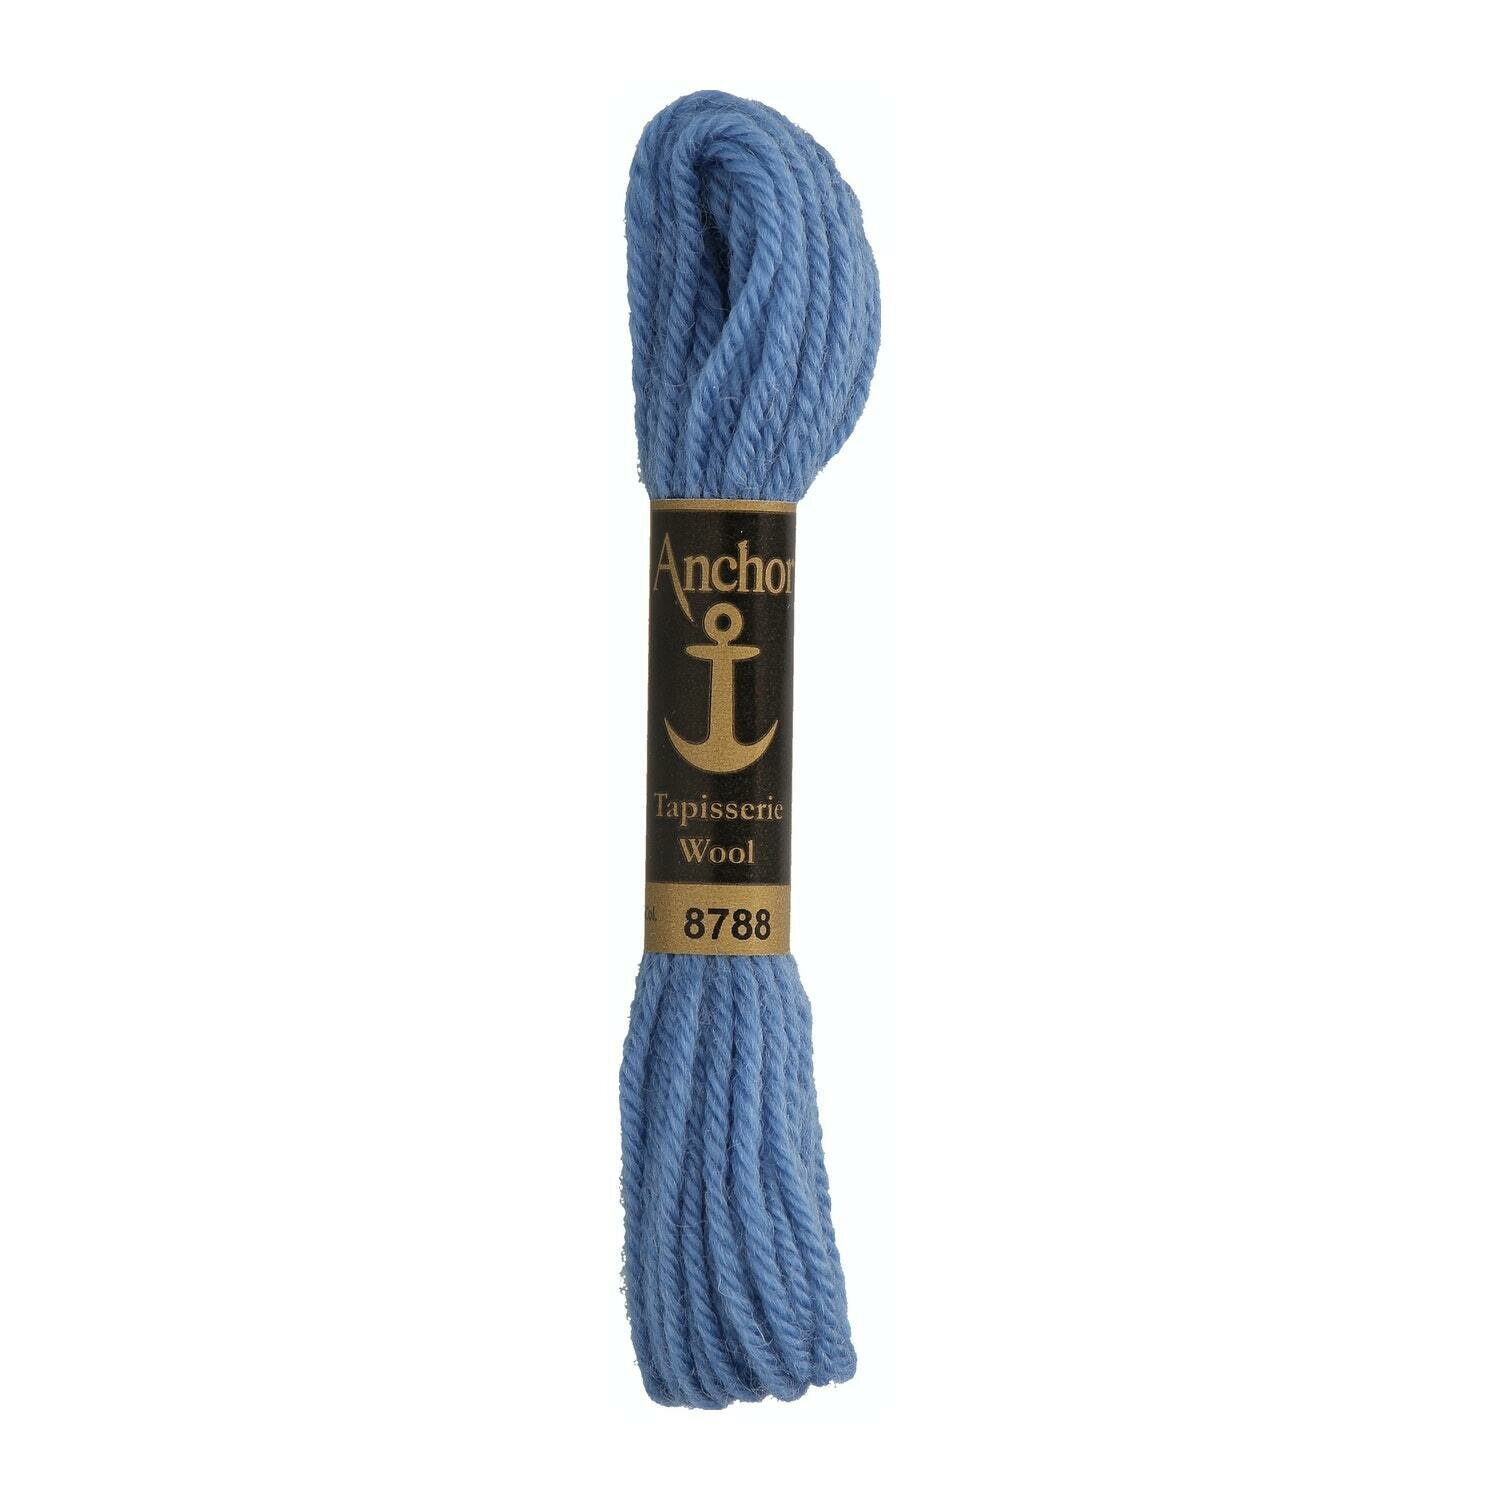 Anchor Tapisserie Wool # 08788